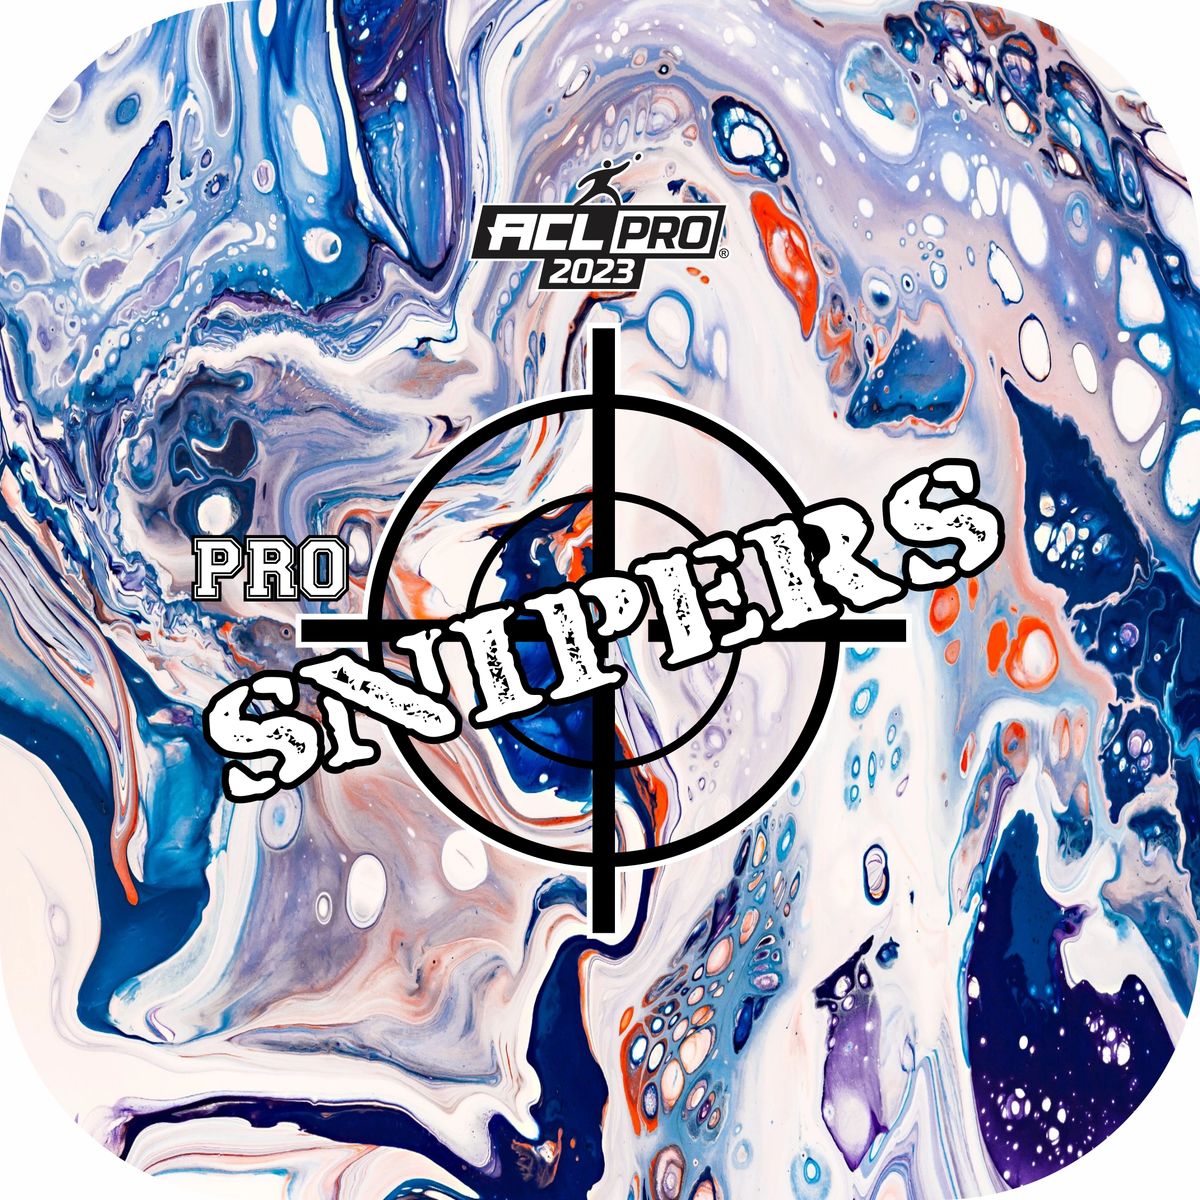 ACL Pro Stamp Eye Catcher Pro Snipers (set of 4)